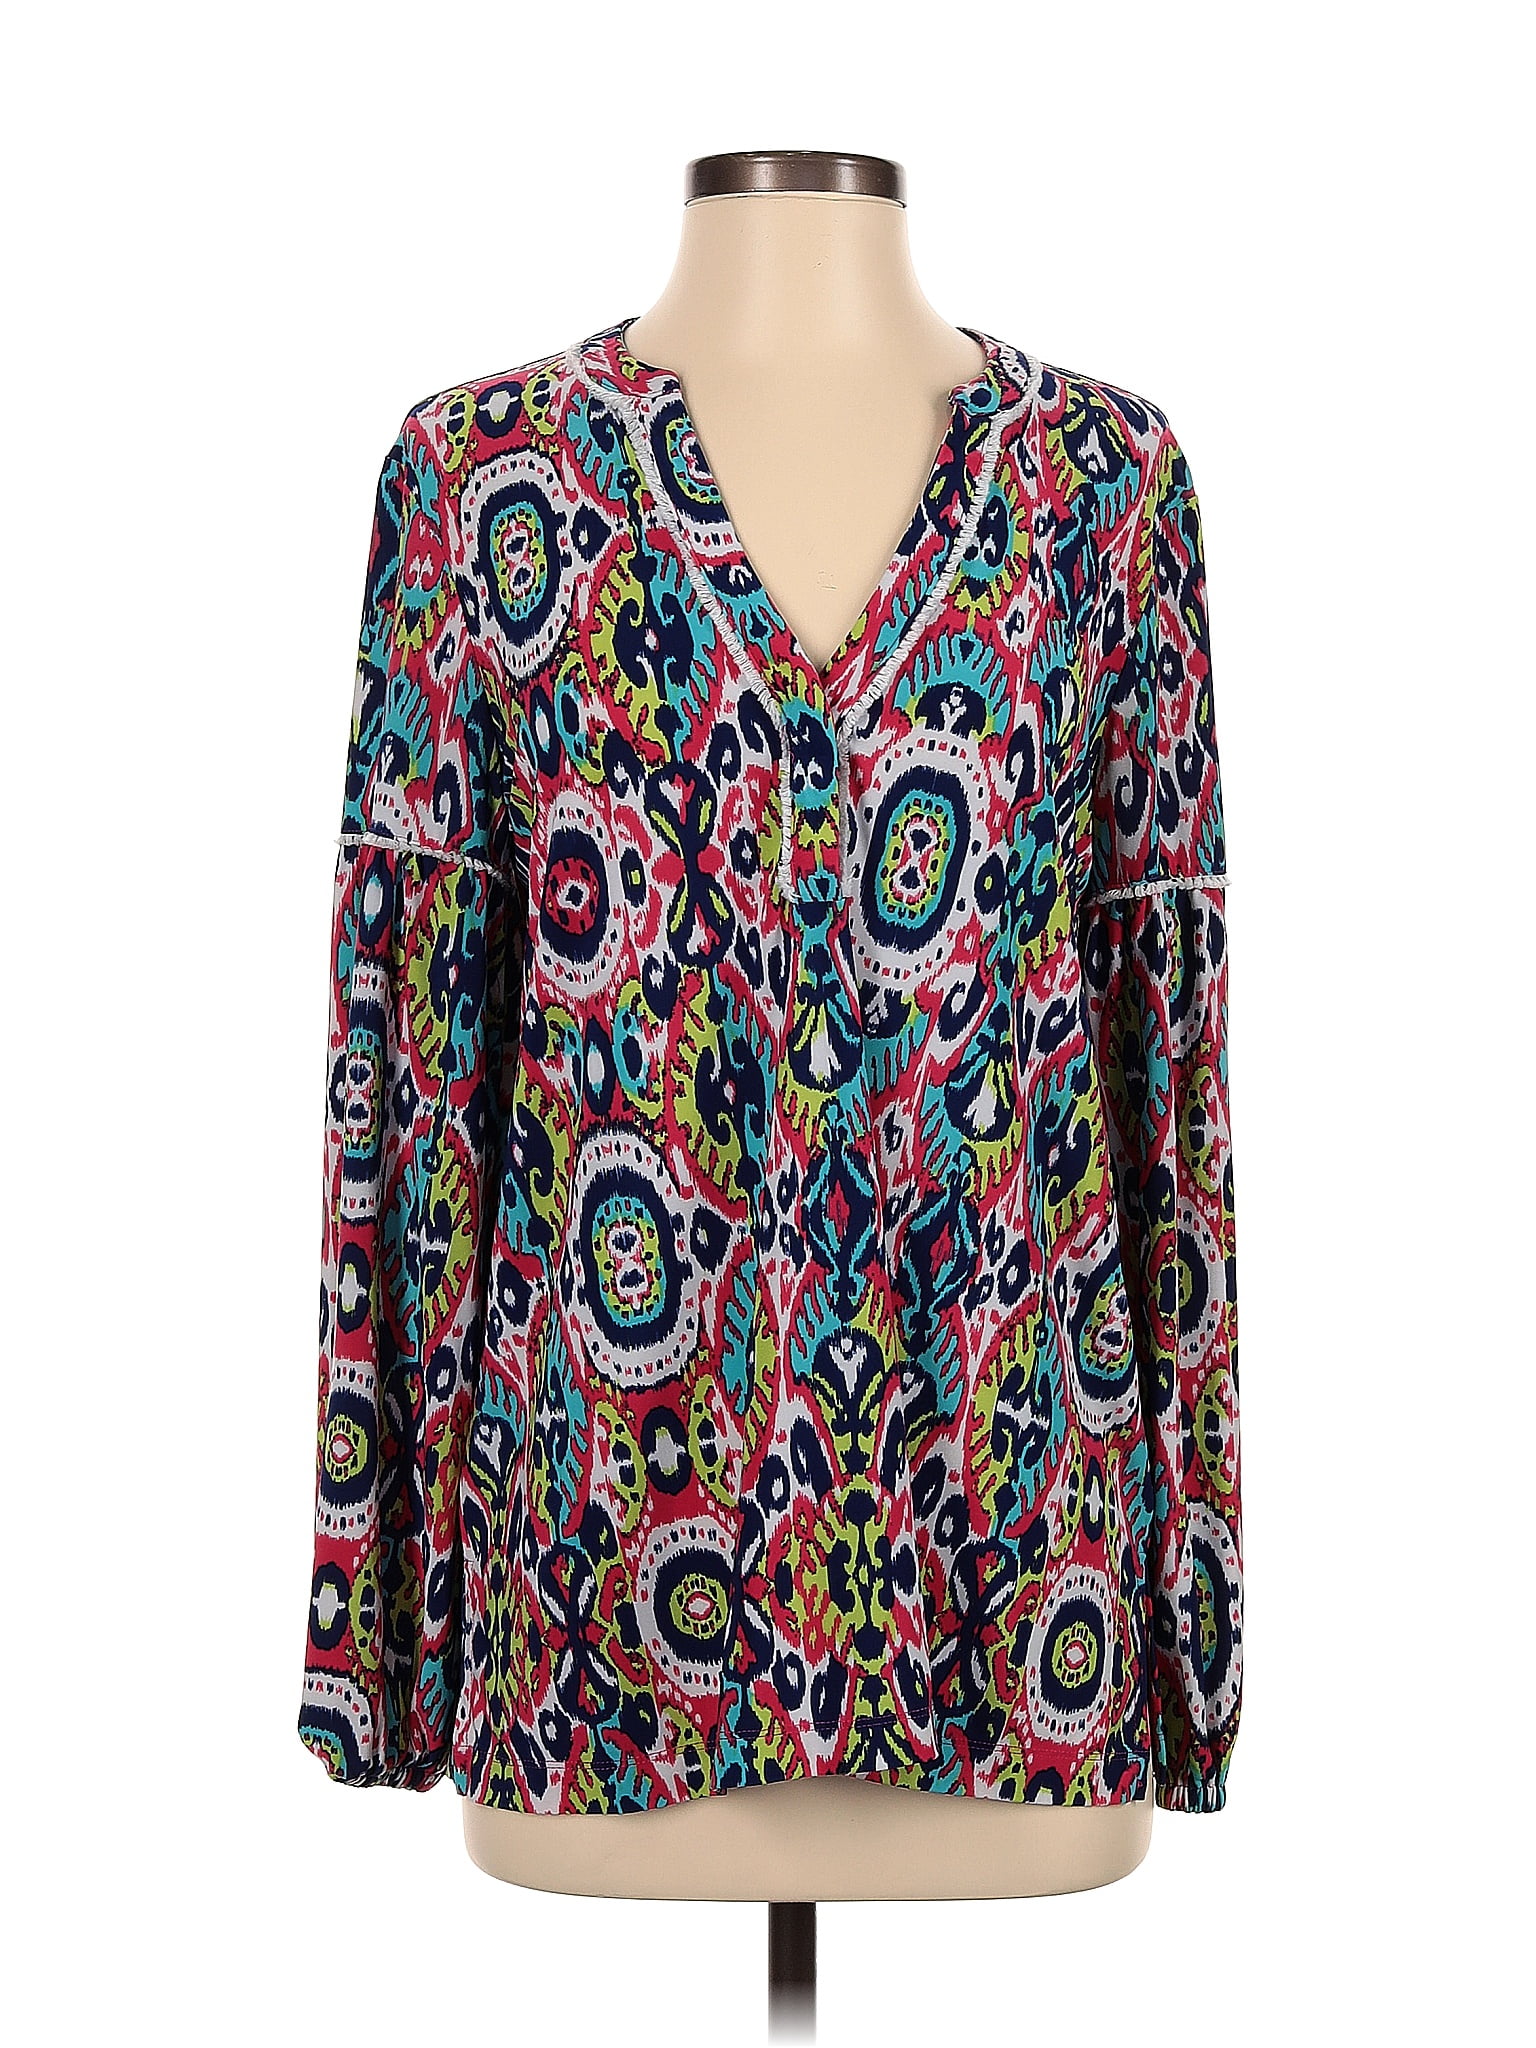 Cappagallo Paisley Multi Color Blue Long Sleeve Top Size S - 52% off ...